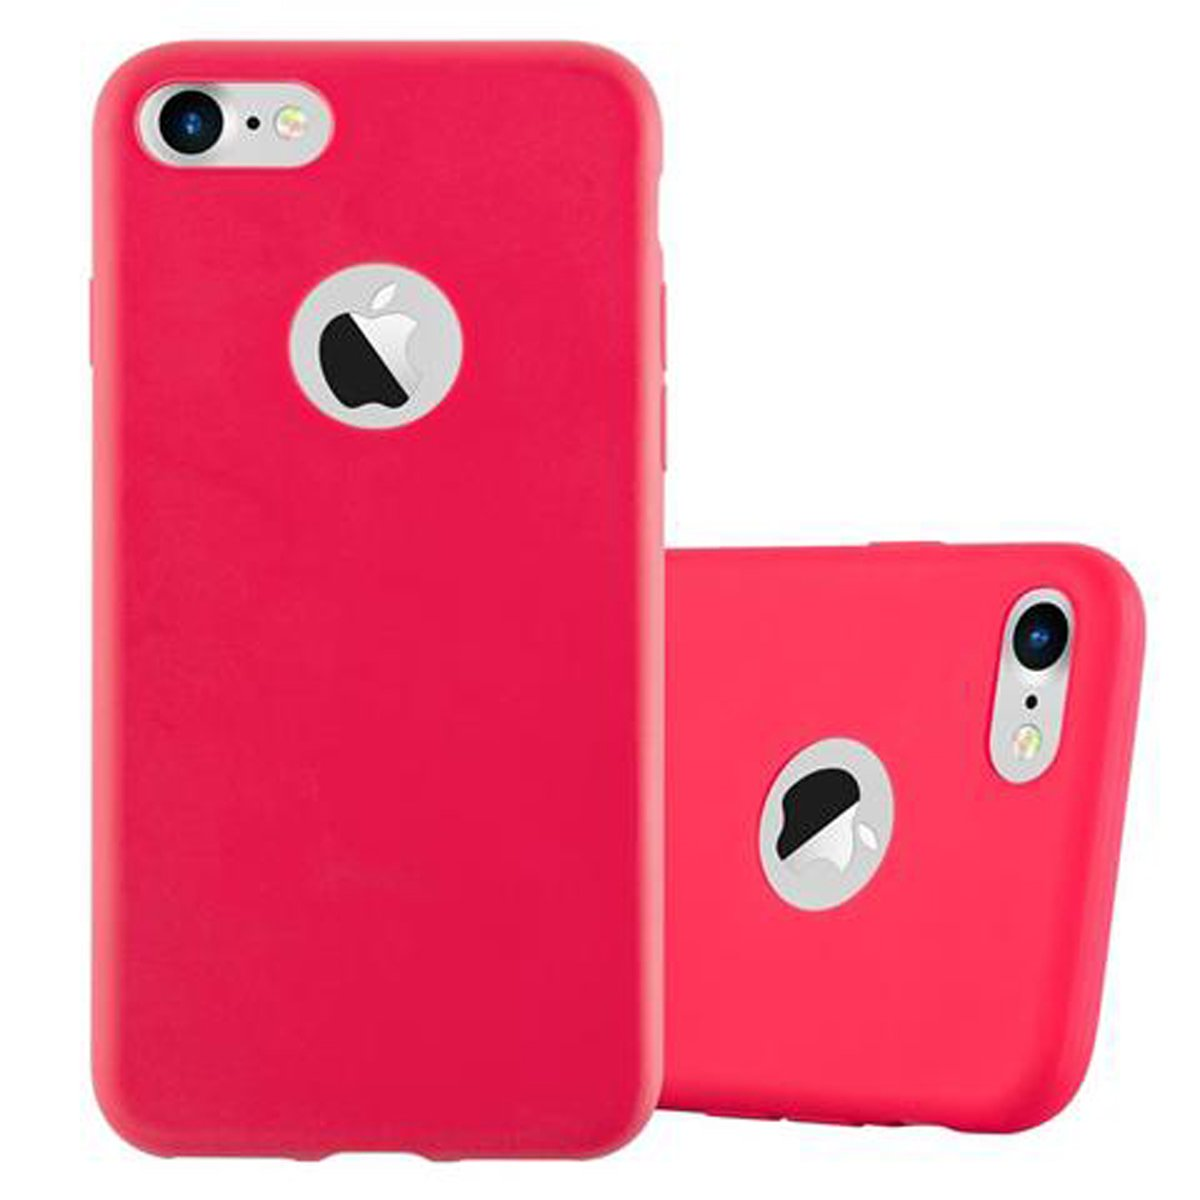 Hülle 2020, 7S 7 Style, CANDY TPU ROT Candy 8 Backcover, / / / CADORABO im SE iPhone Apple,